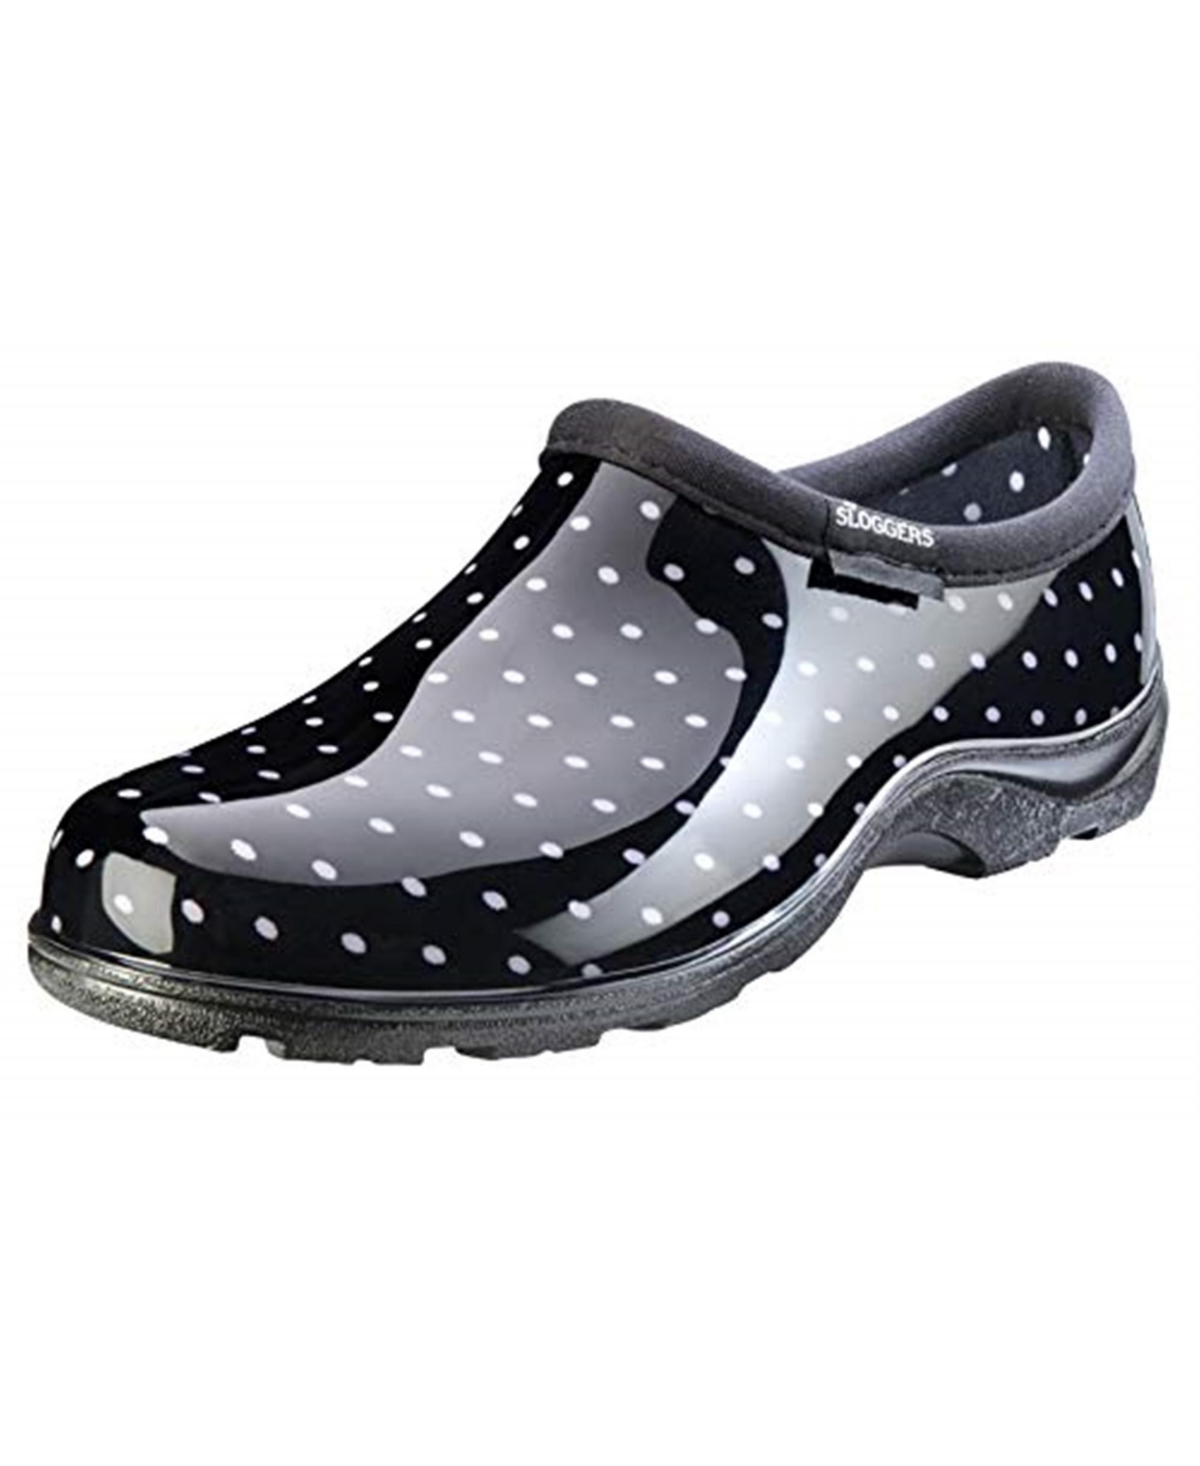 Sloggers Womens Rain And Garden Shoes, Black And White Polka-dots, Size 8 In Multi